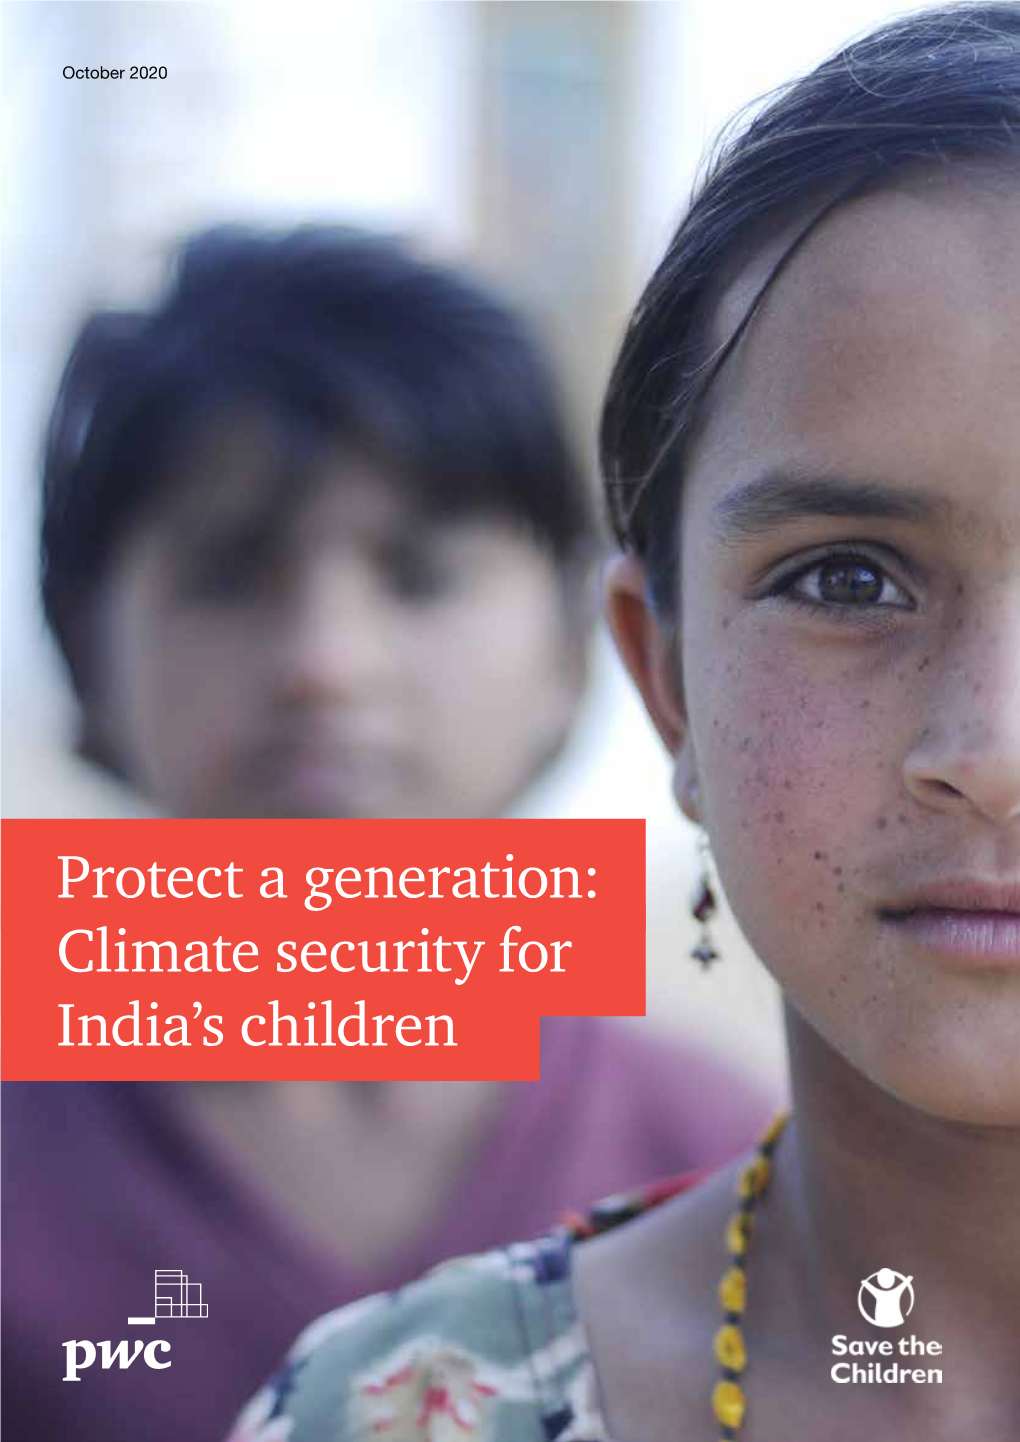 Protect a Generation: Climate Security for India's Children